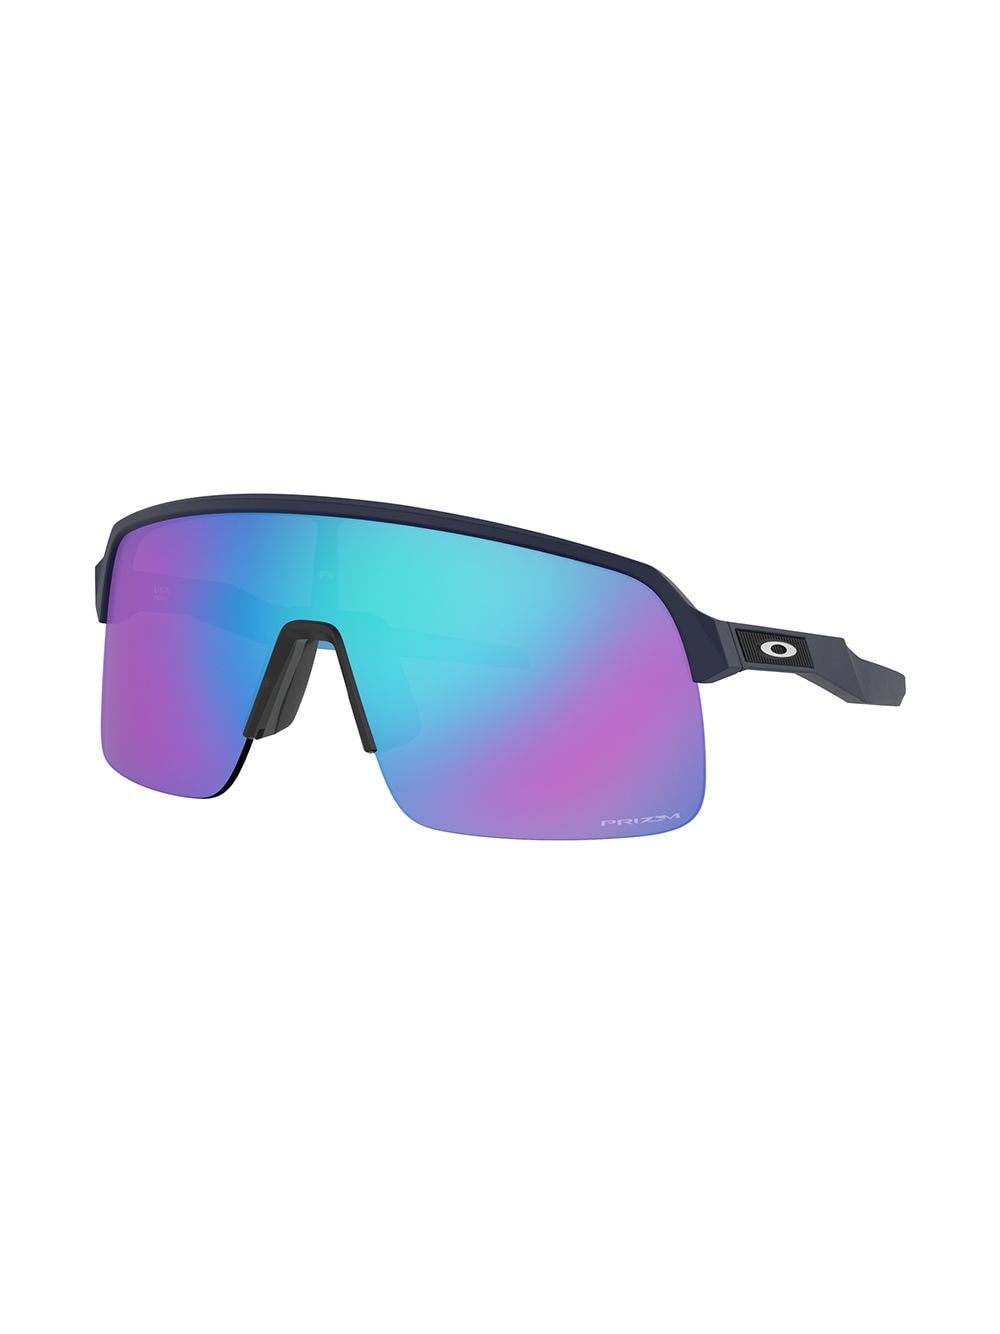 Shop Oakley Sutro Lite visor sunglsses with Express Delivery - FARFETCH